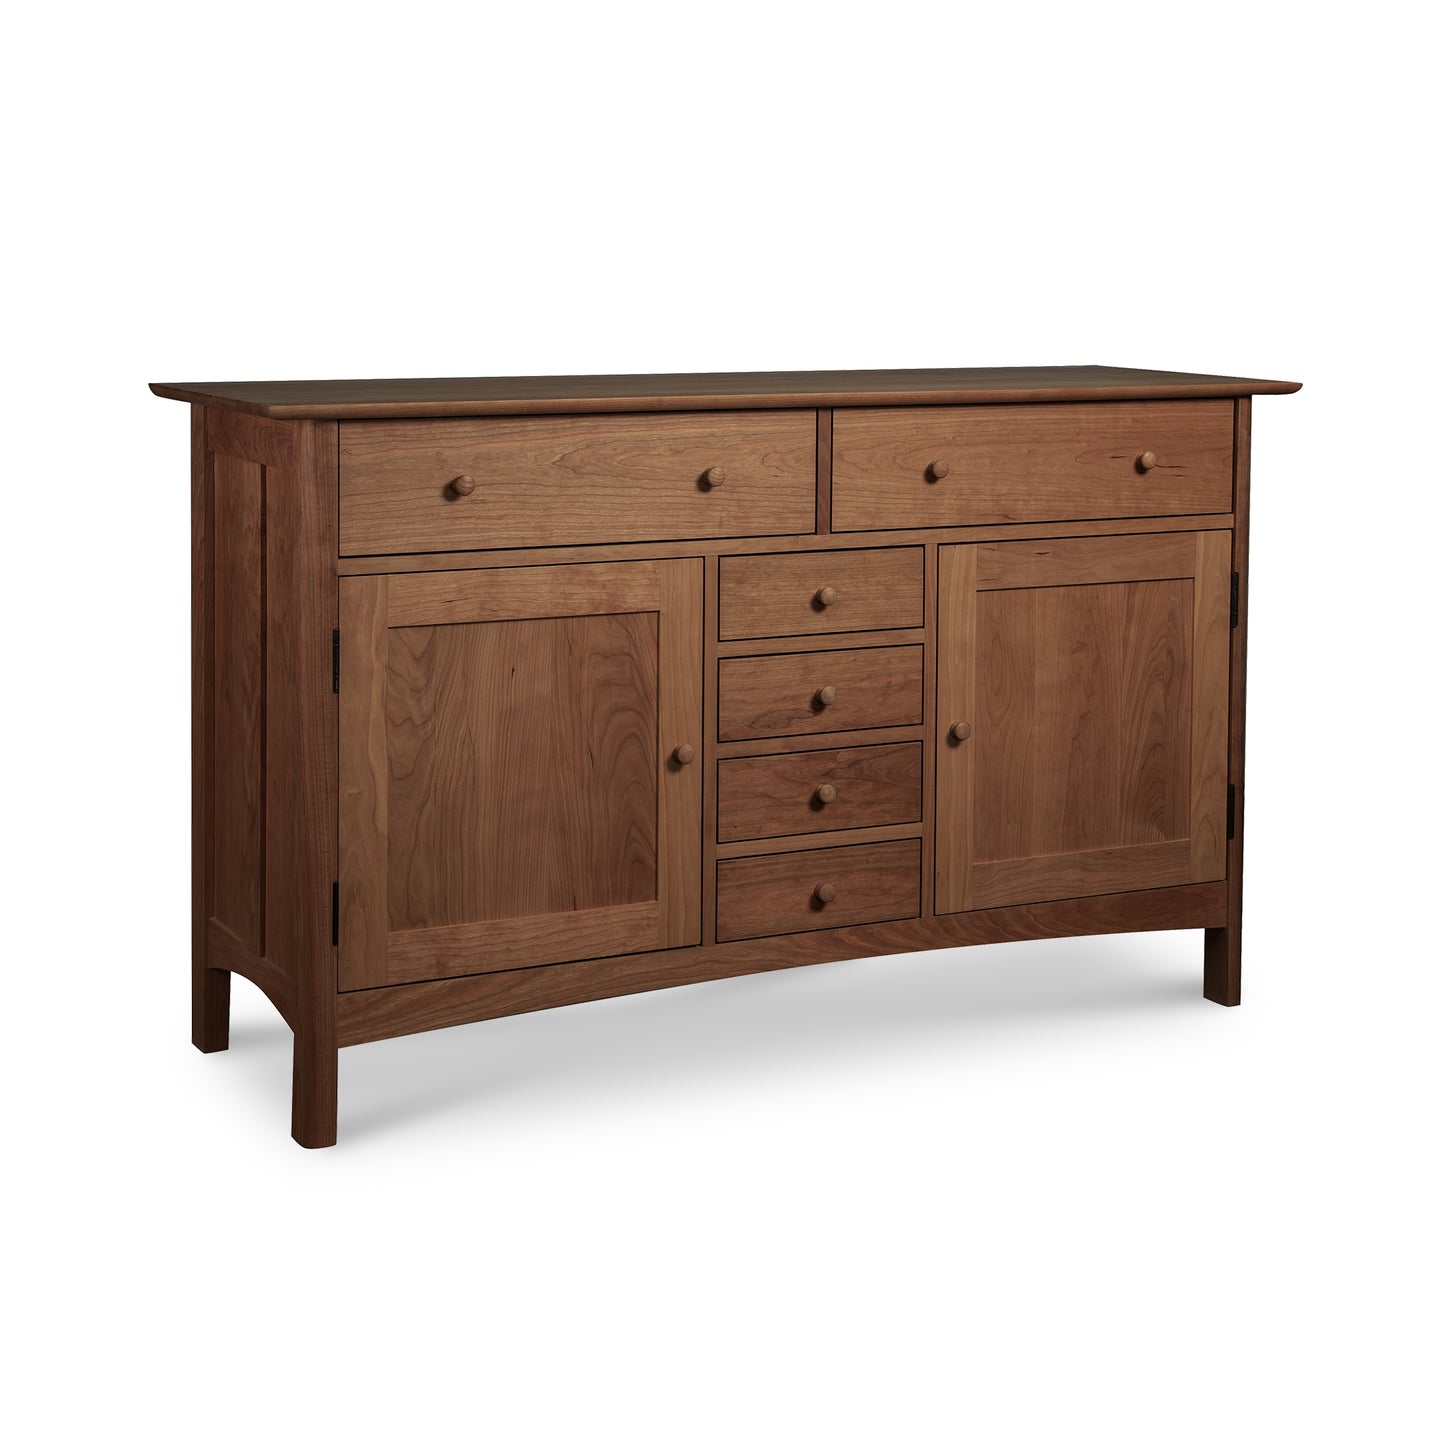 Solid hardwoods Vermont Furniture Designs Heartwood Shaker Sideboard with six drawers and two cabinet doors on a white background.